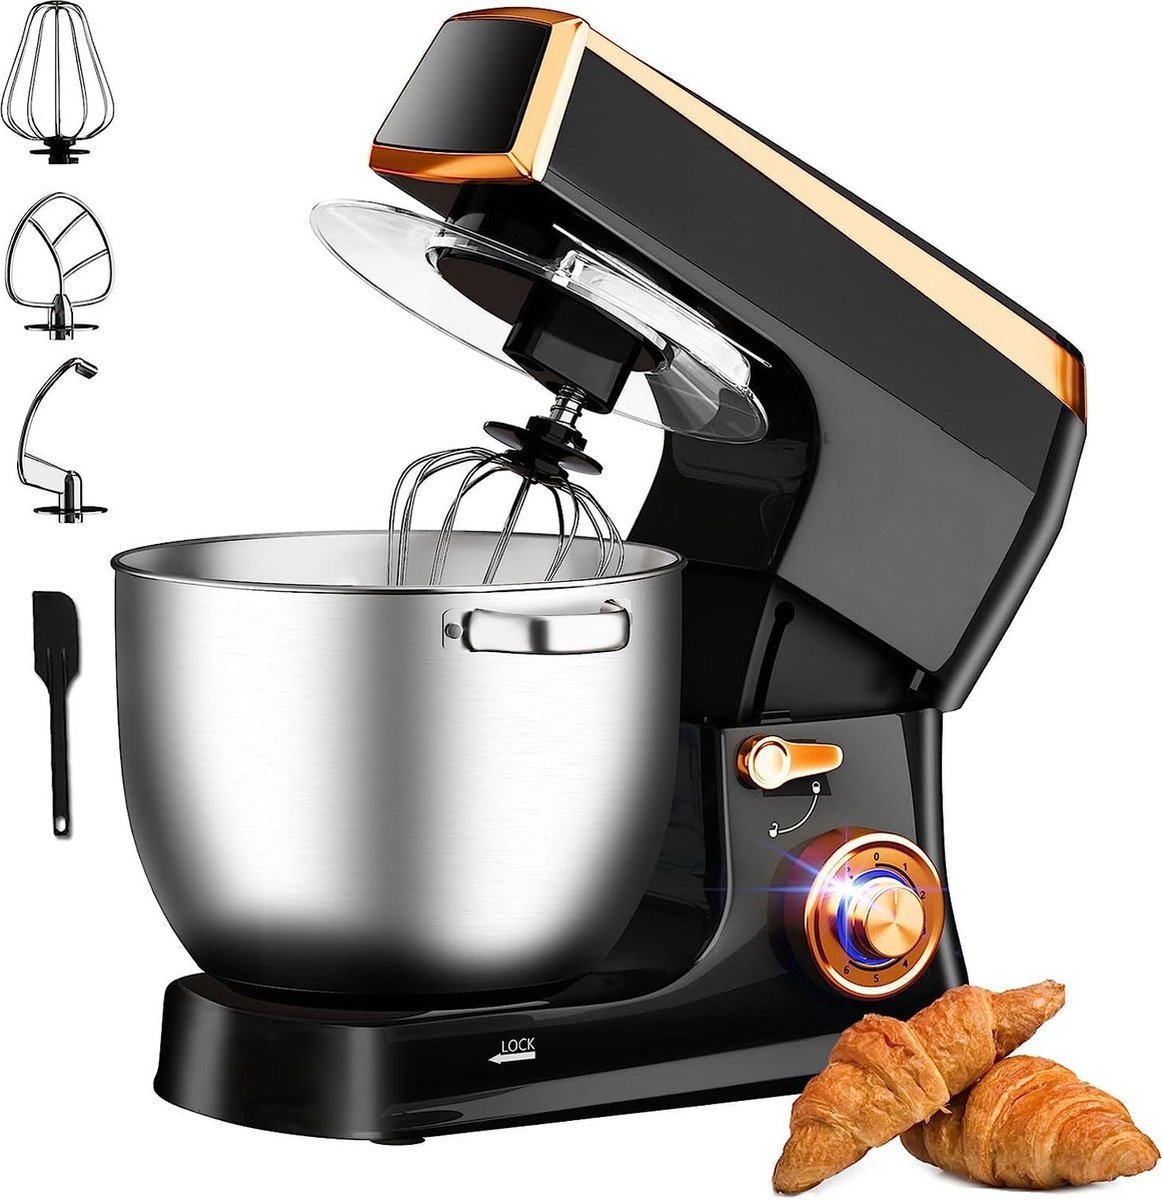 Planetary Mixer With Whisk, Dough Hook, Mixing Hook, Pan Scraper, With Splash Guard & Stainless Steel Mixing Bowl 7.5 L- 2100W - Black - Royalty Line